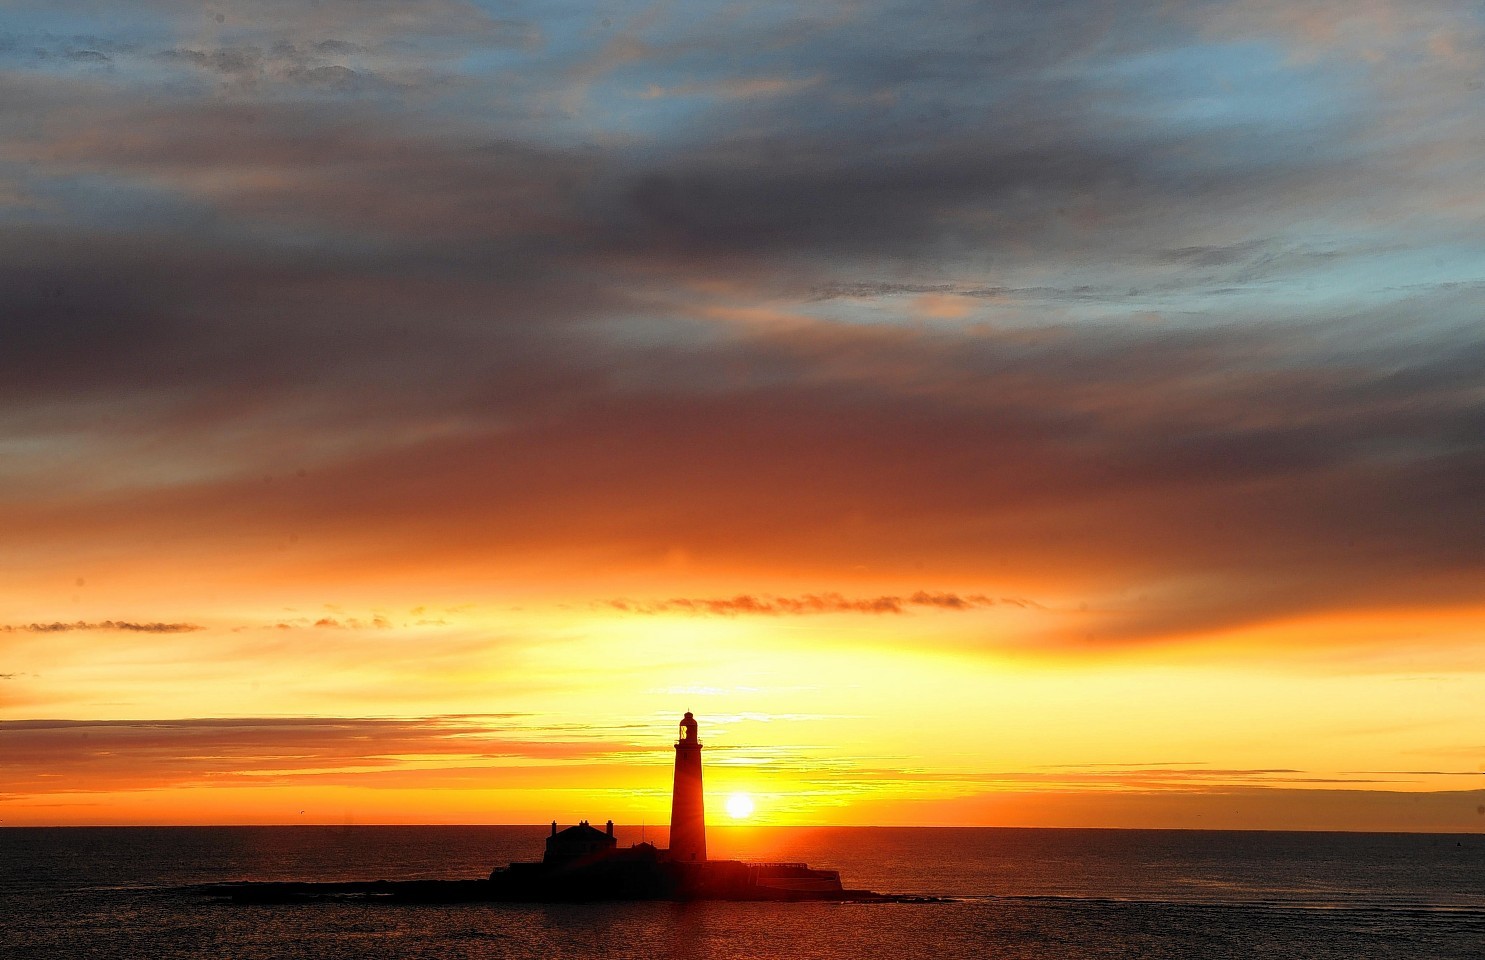 St Mary's Lighthouse in Whitley Bay, East of Newcastle.